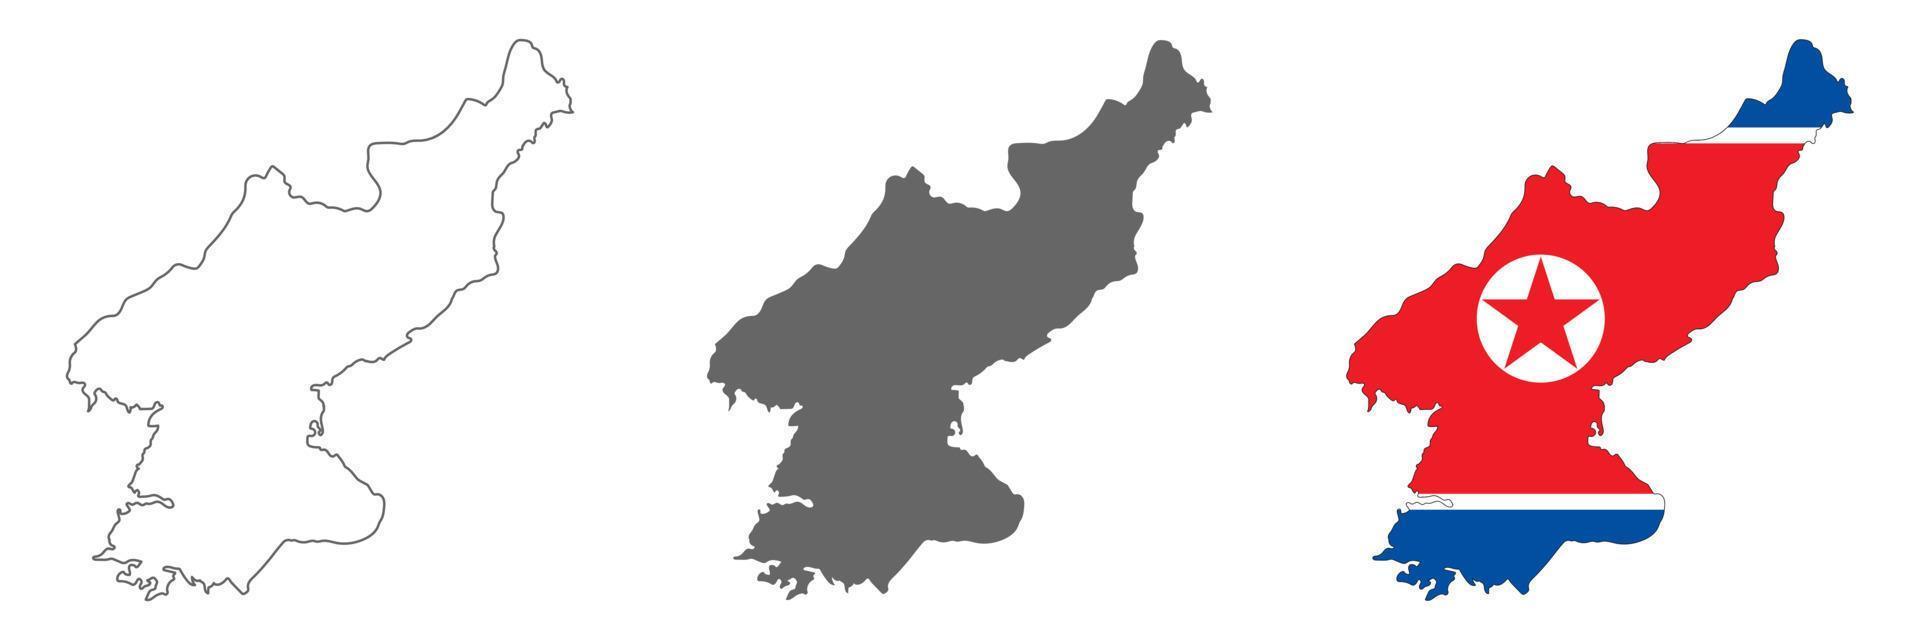 Highly detailed North Korea map with borders isolated on background vector